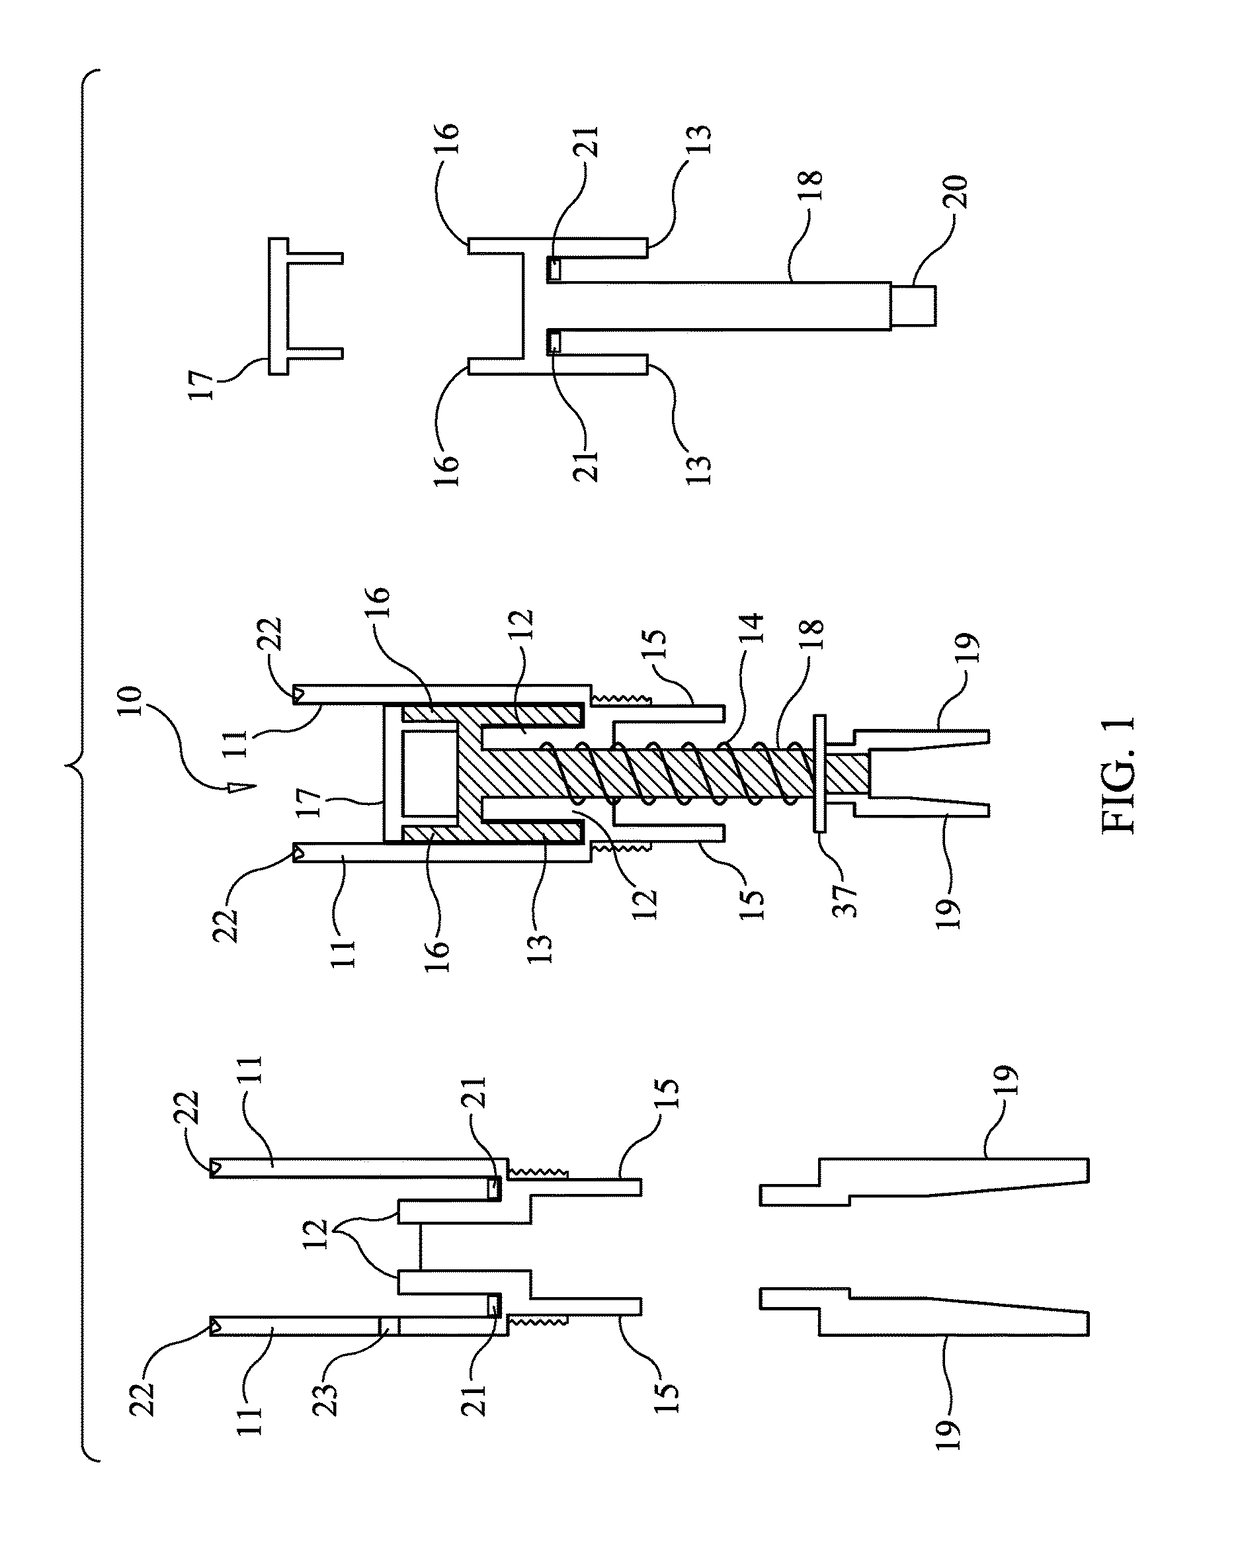 Microneedle cartridge and nosecone assembly